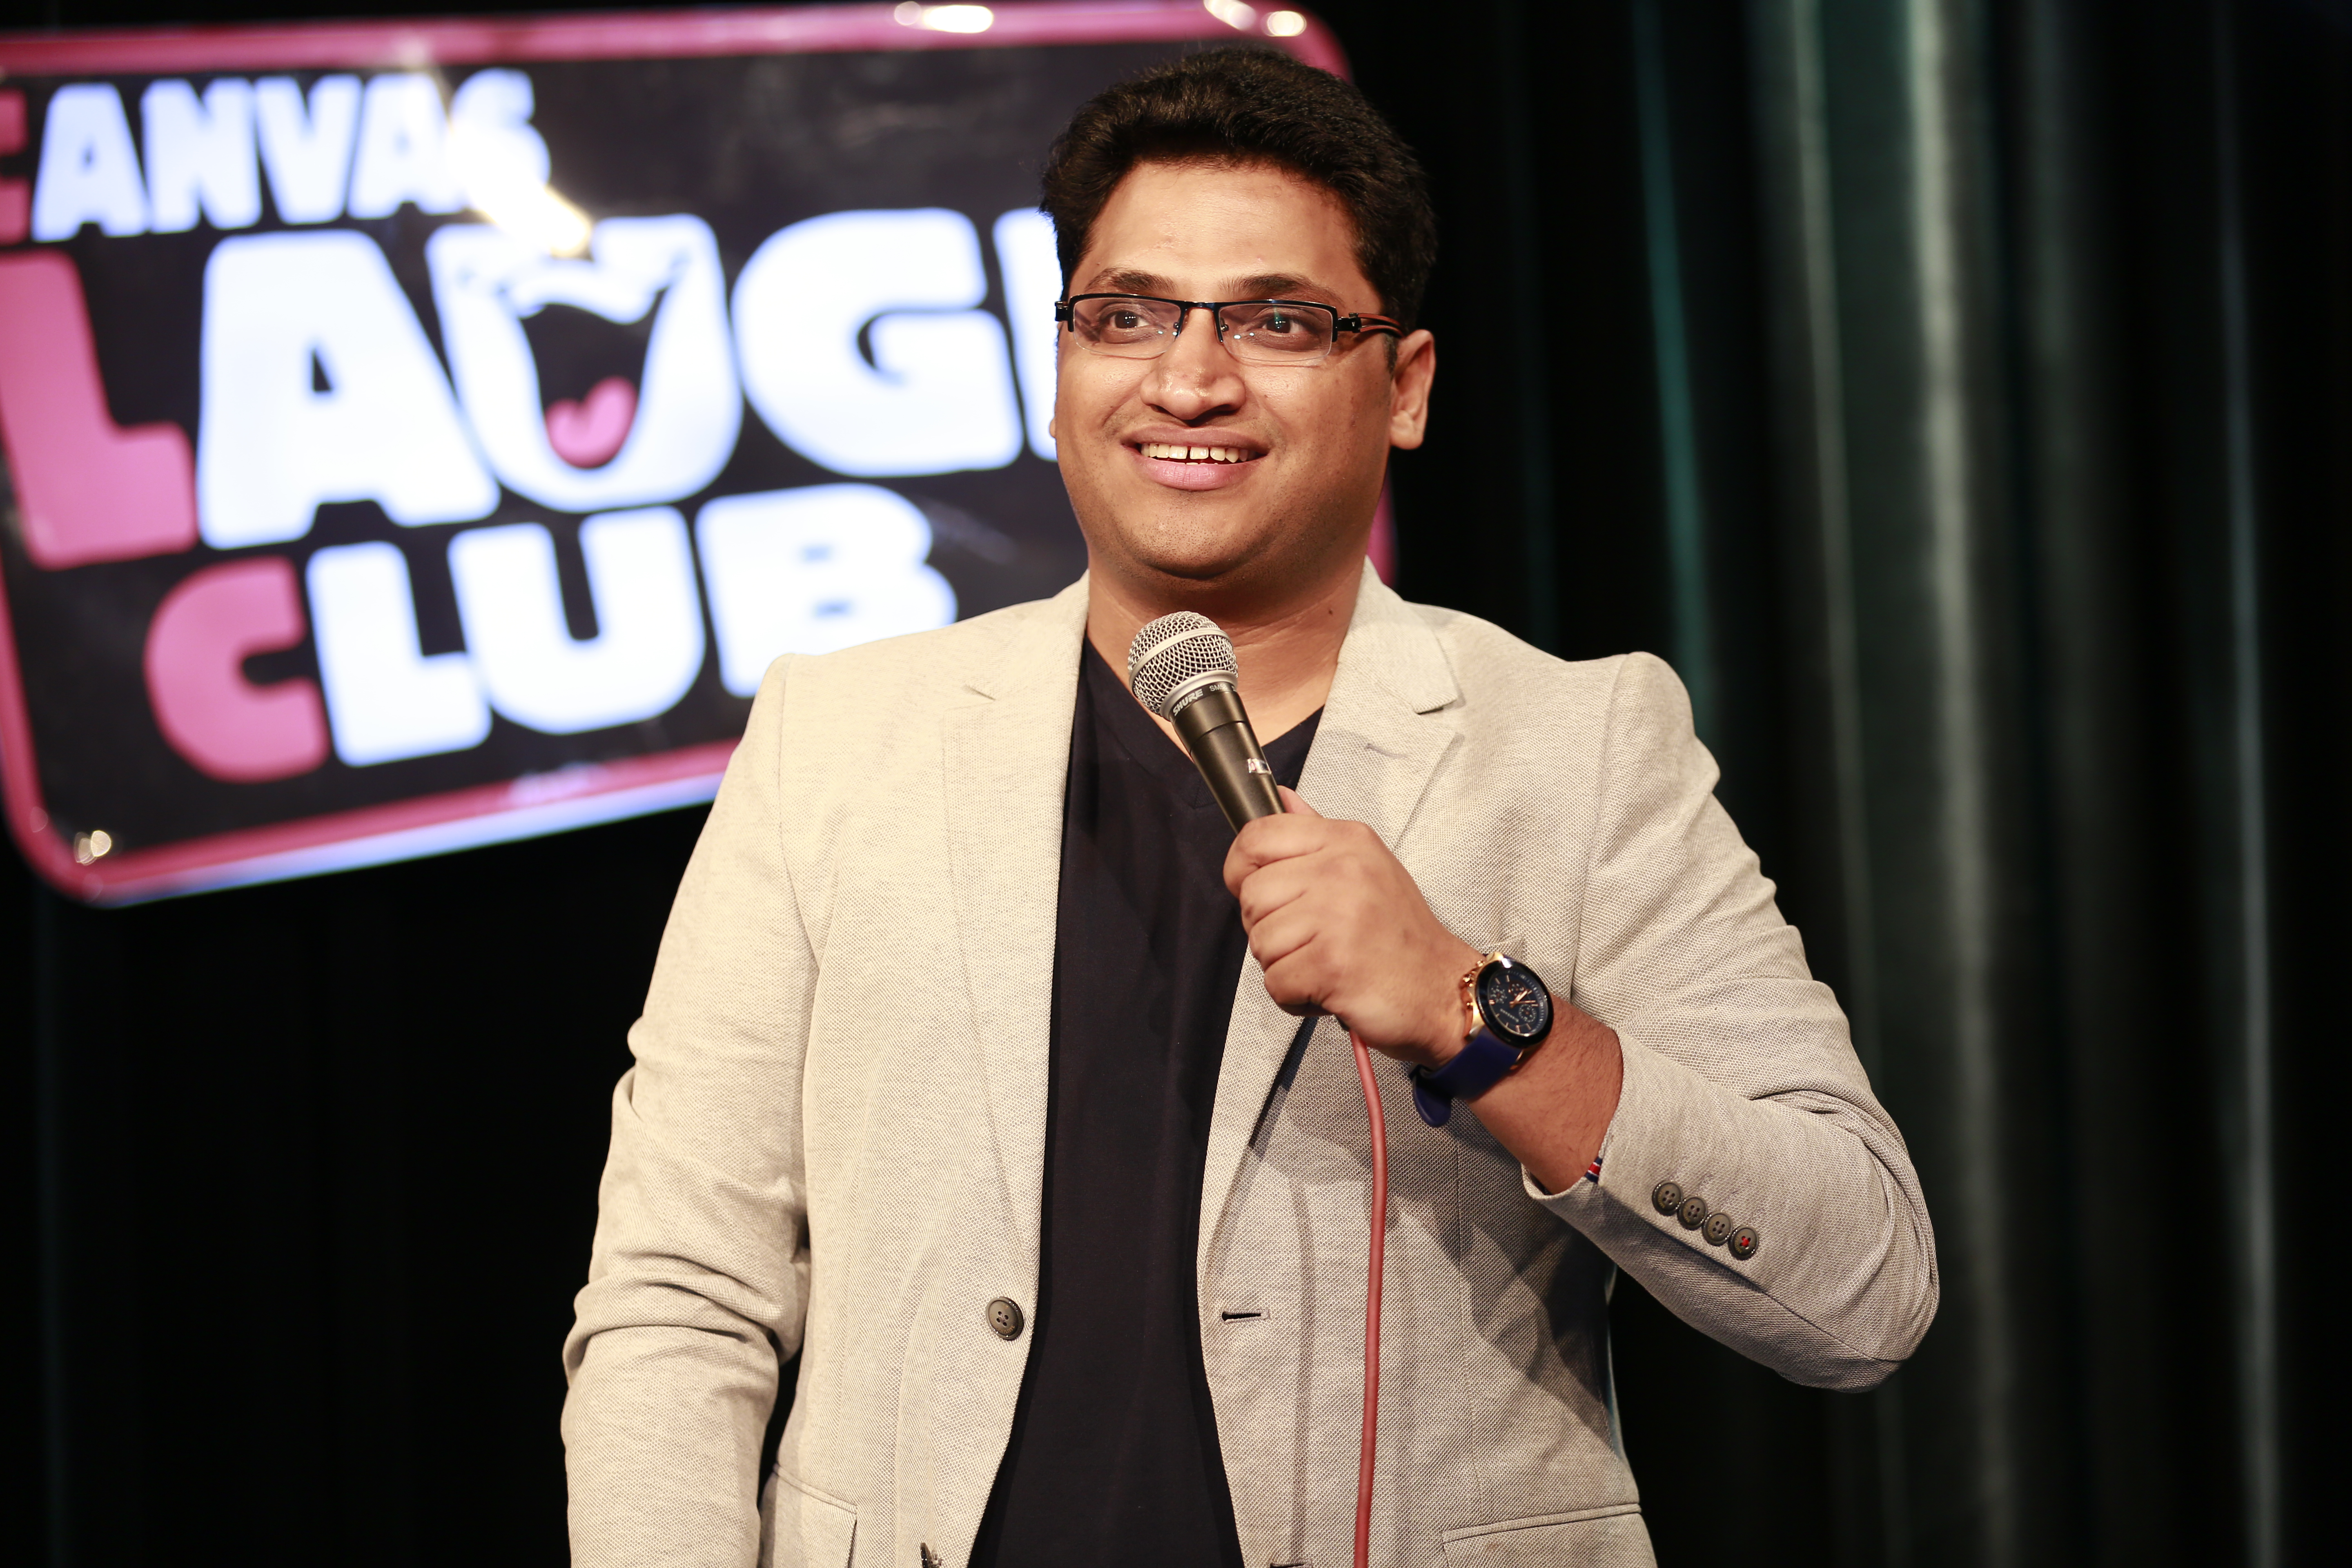 Laugh Out Loud With Gaurav Gupta On Thursday, Only @ Cervesia!